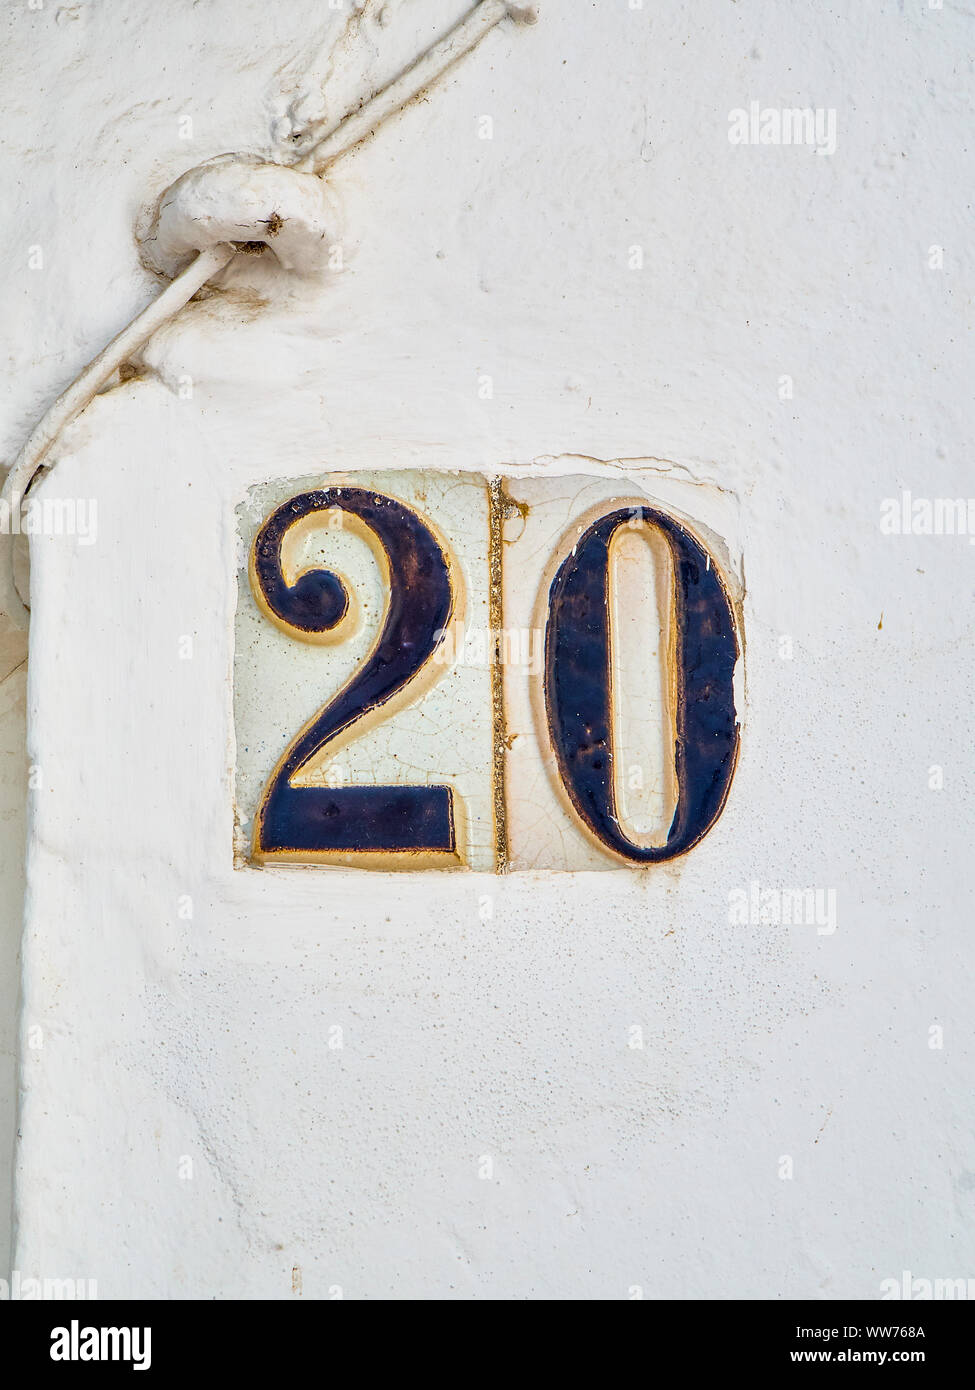 Antique ceramic tile number 20 on a whitewashed wall. Antique european style. Stock Photo